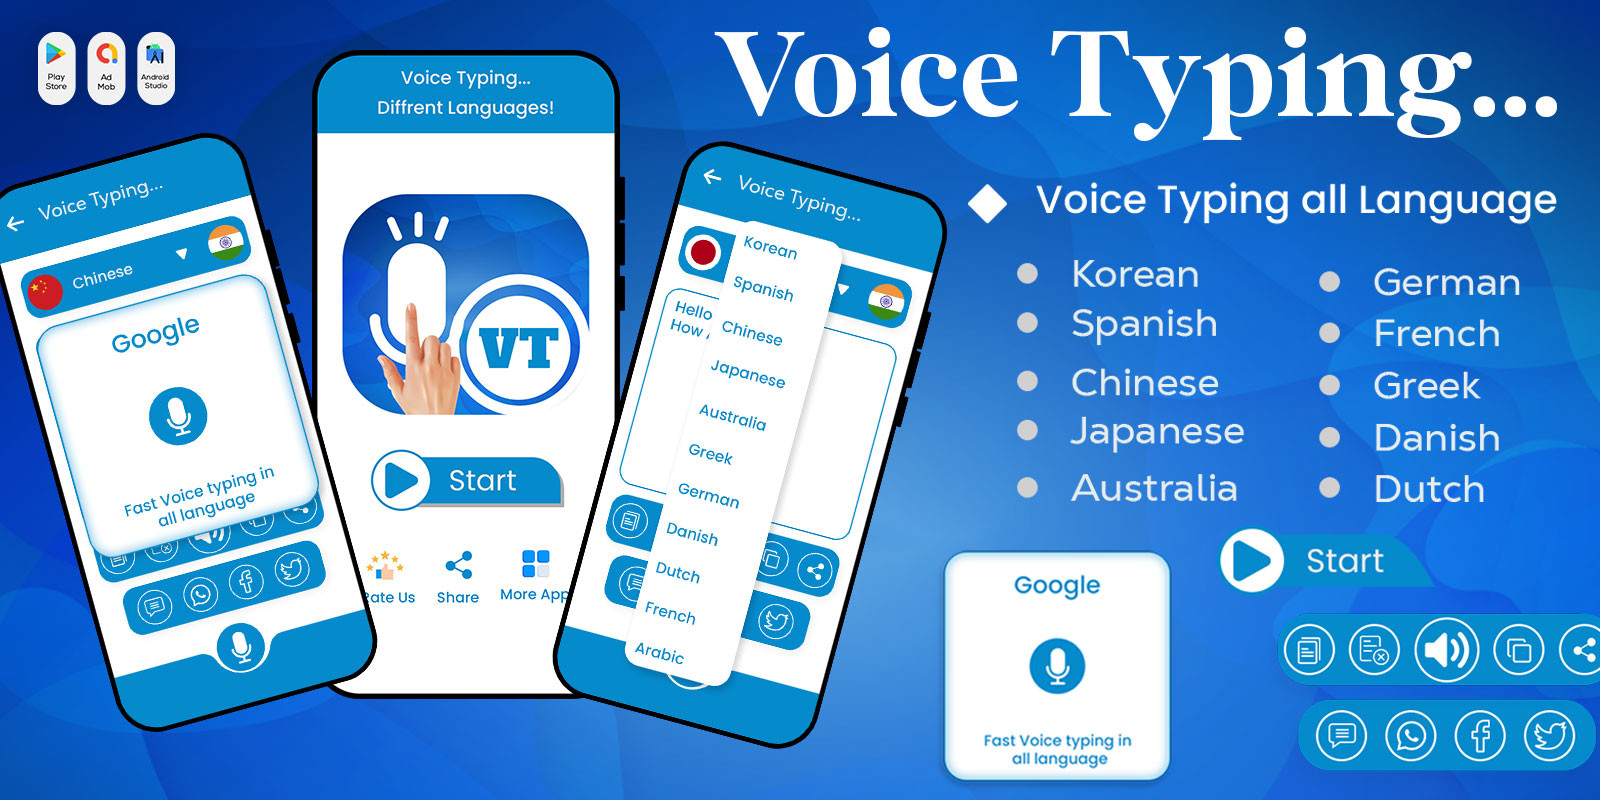 More information about "Voice Typing All Languages - Android Source Code"